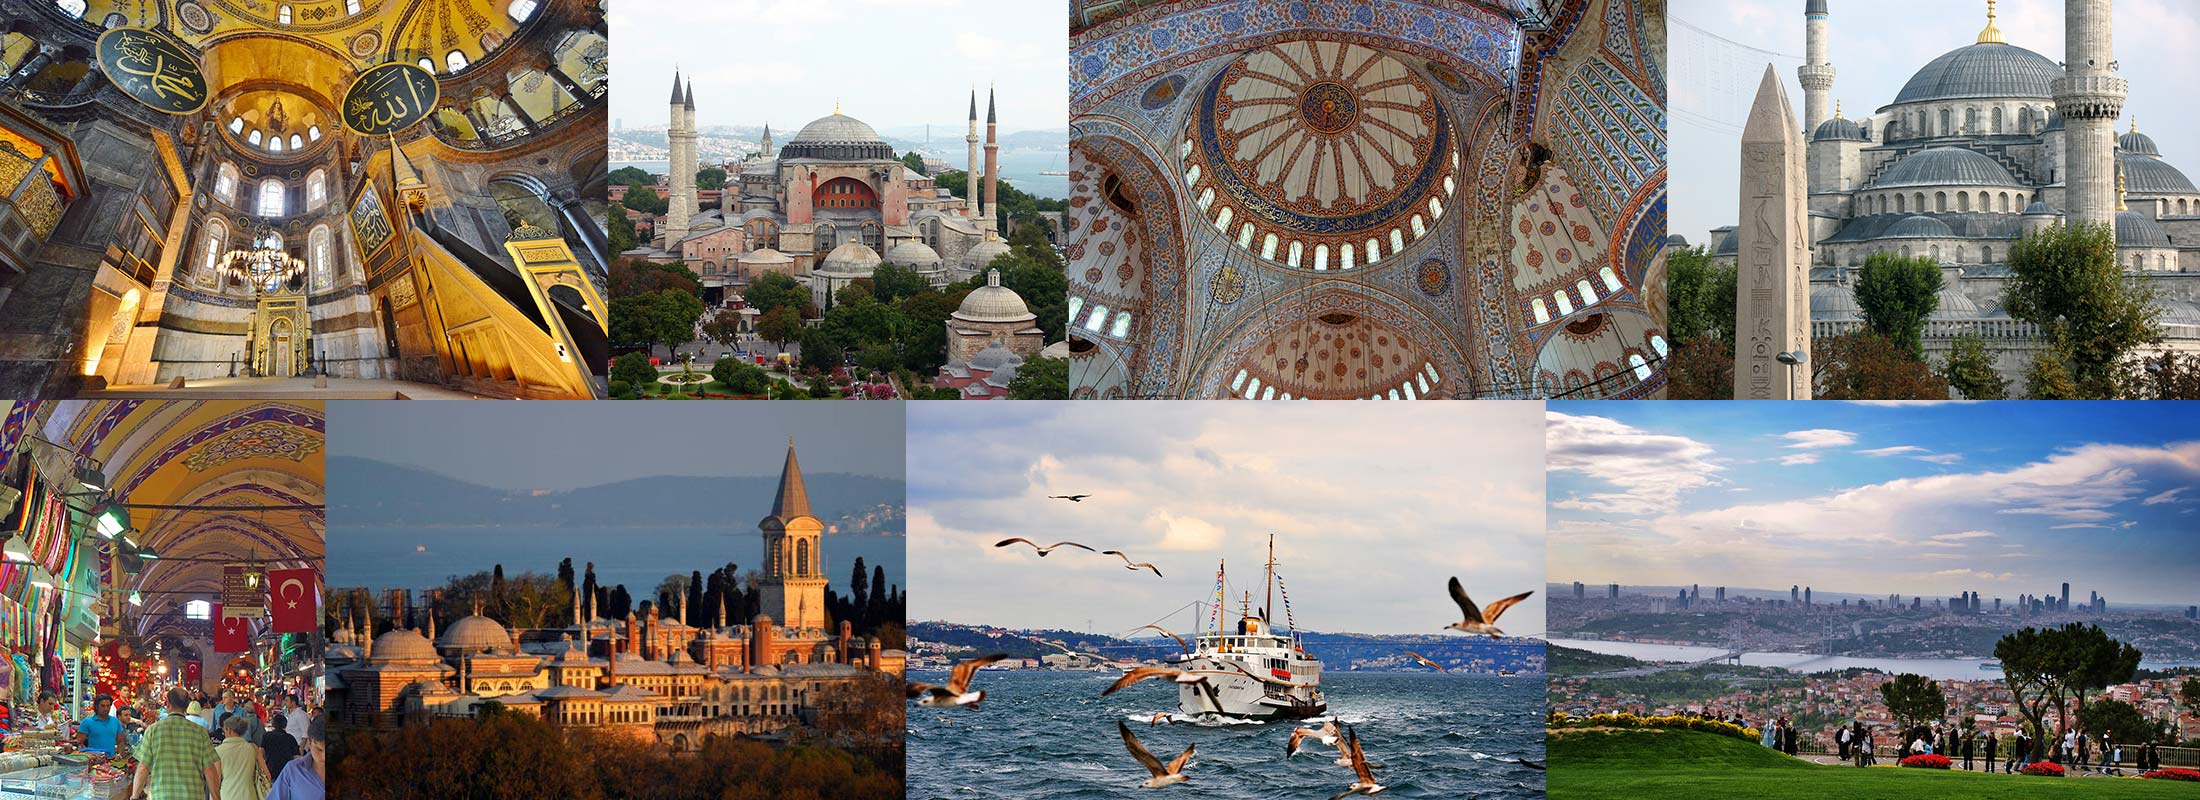 4-days-package-tours-istanbul